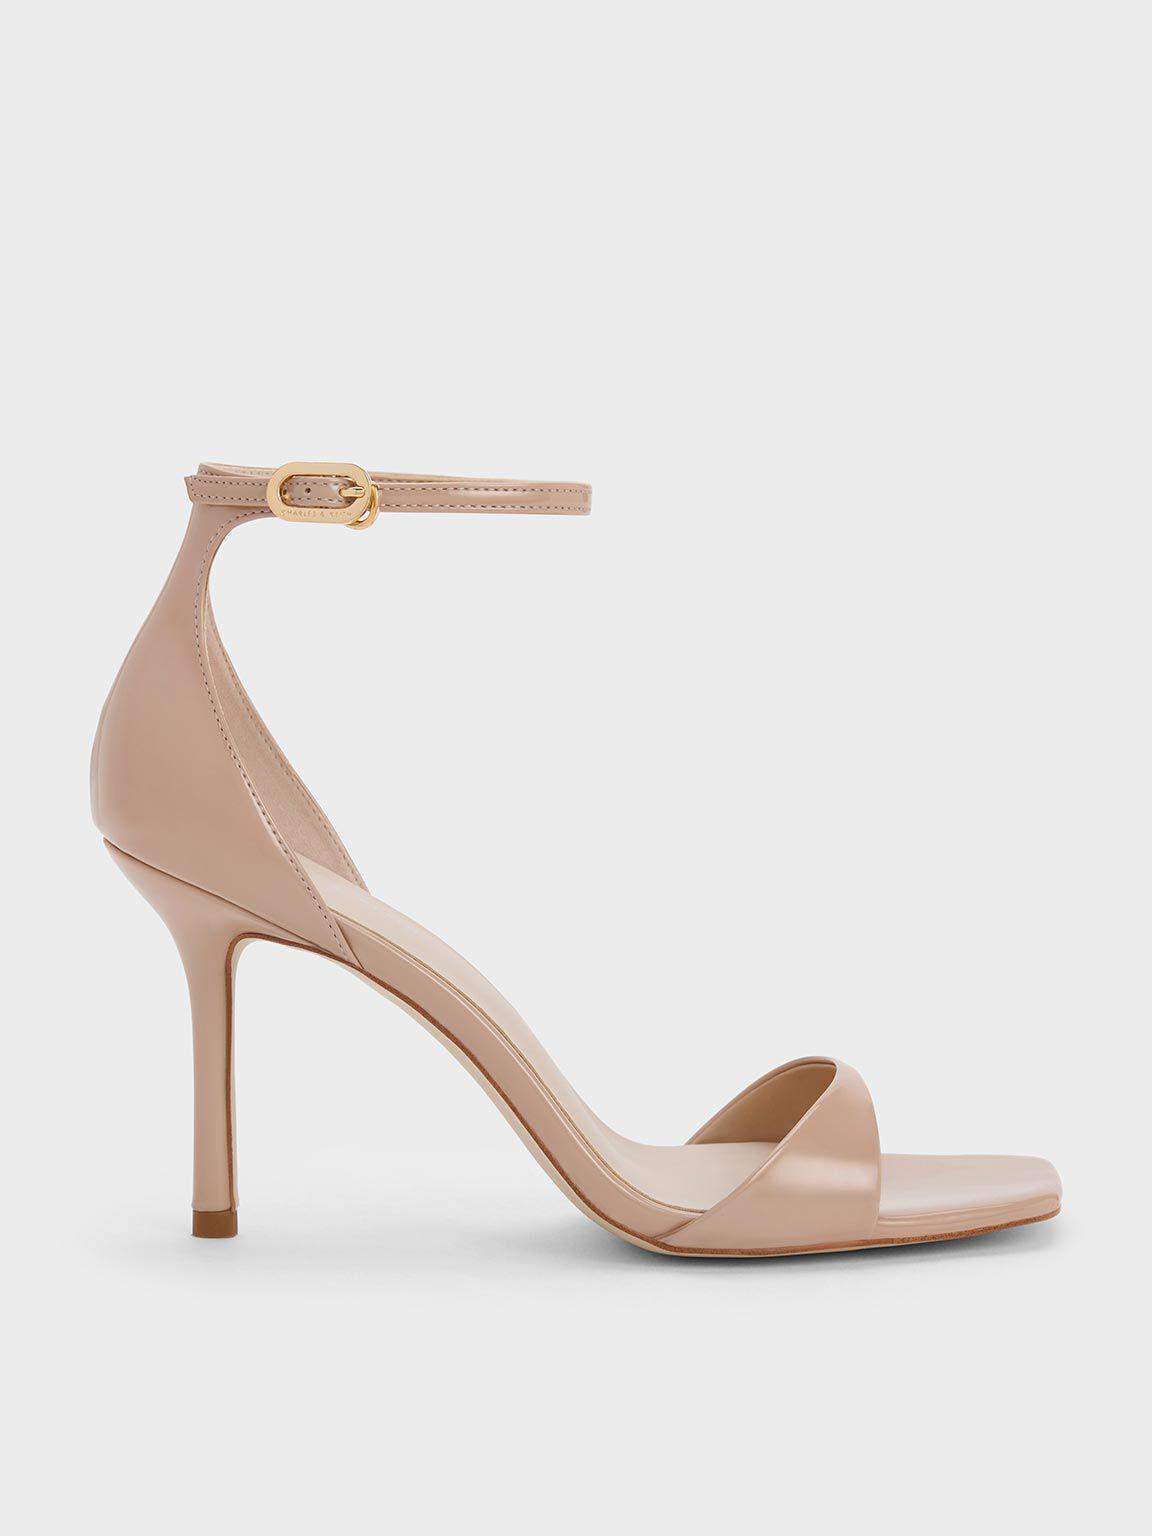 Swedish Nudist Beach Babes - Nude Patent Ankle Strap Heeled Sandals - CHARLES & KEITH SG